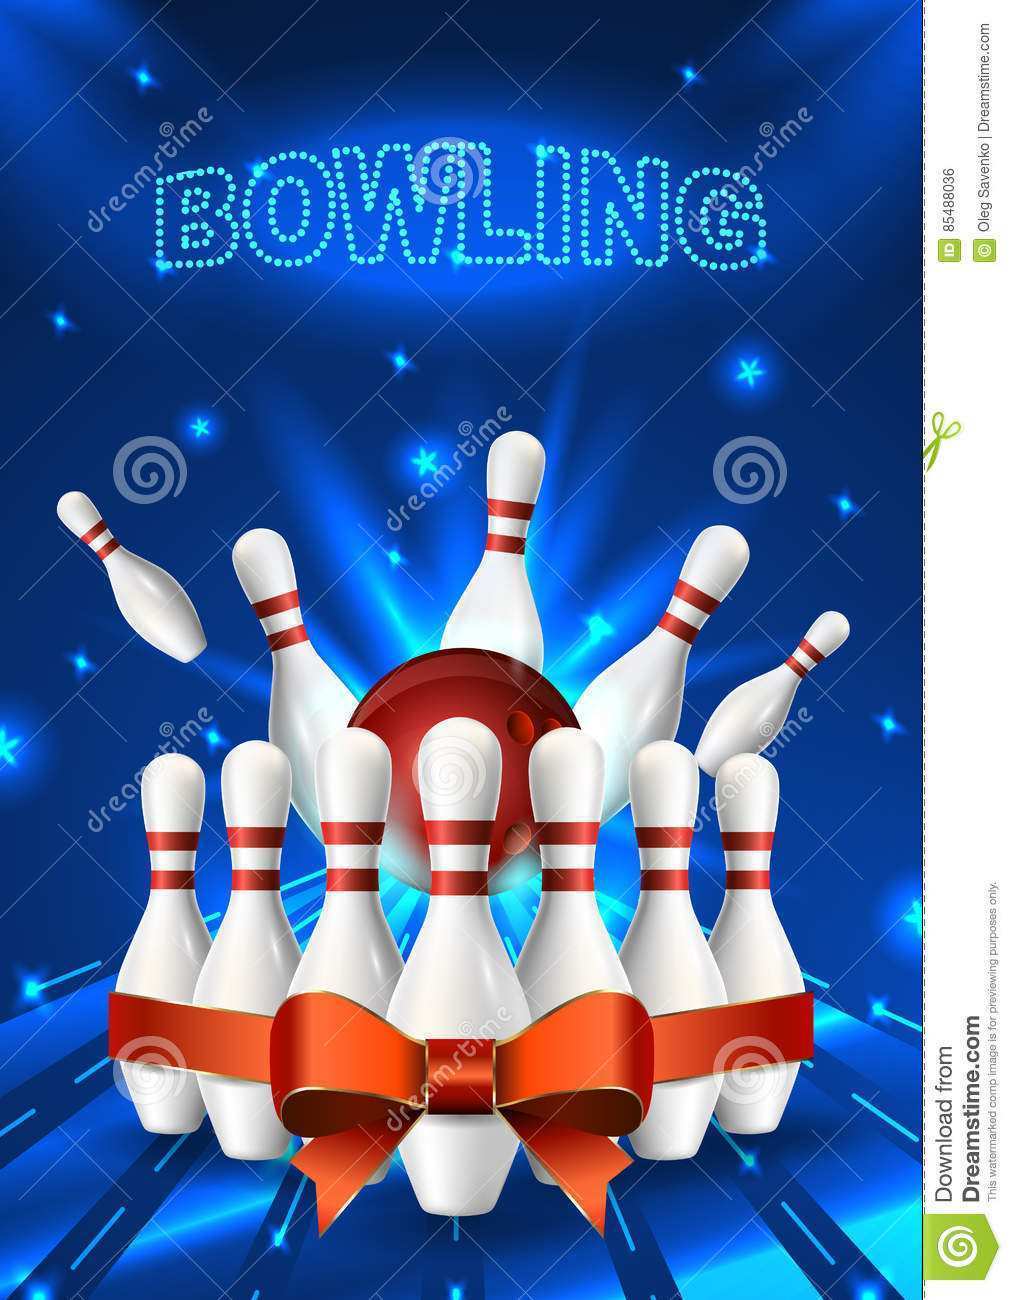 39 Format Bowling Flyer Template Free Photo for Bowling Flyer Template Free